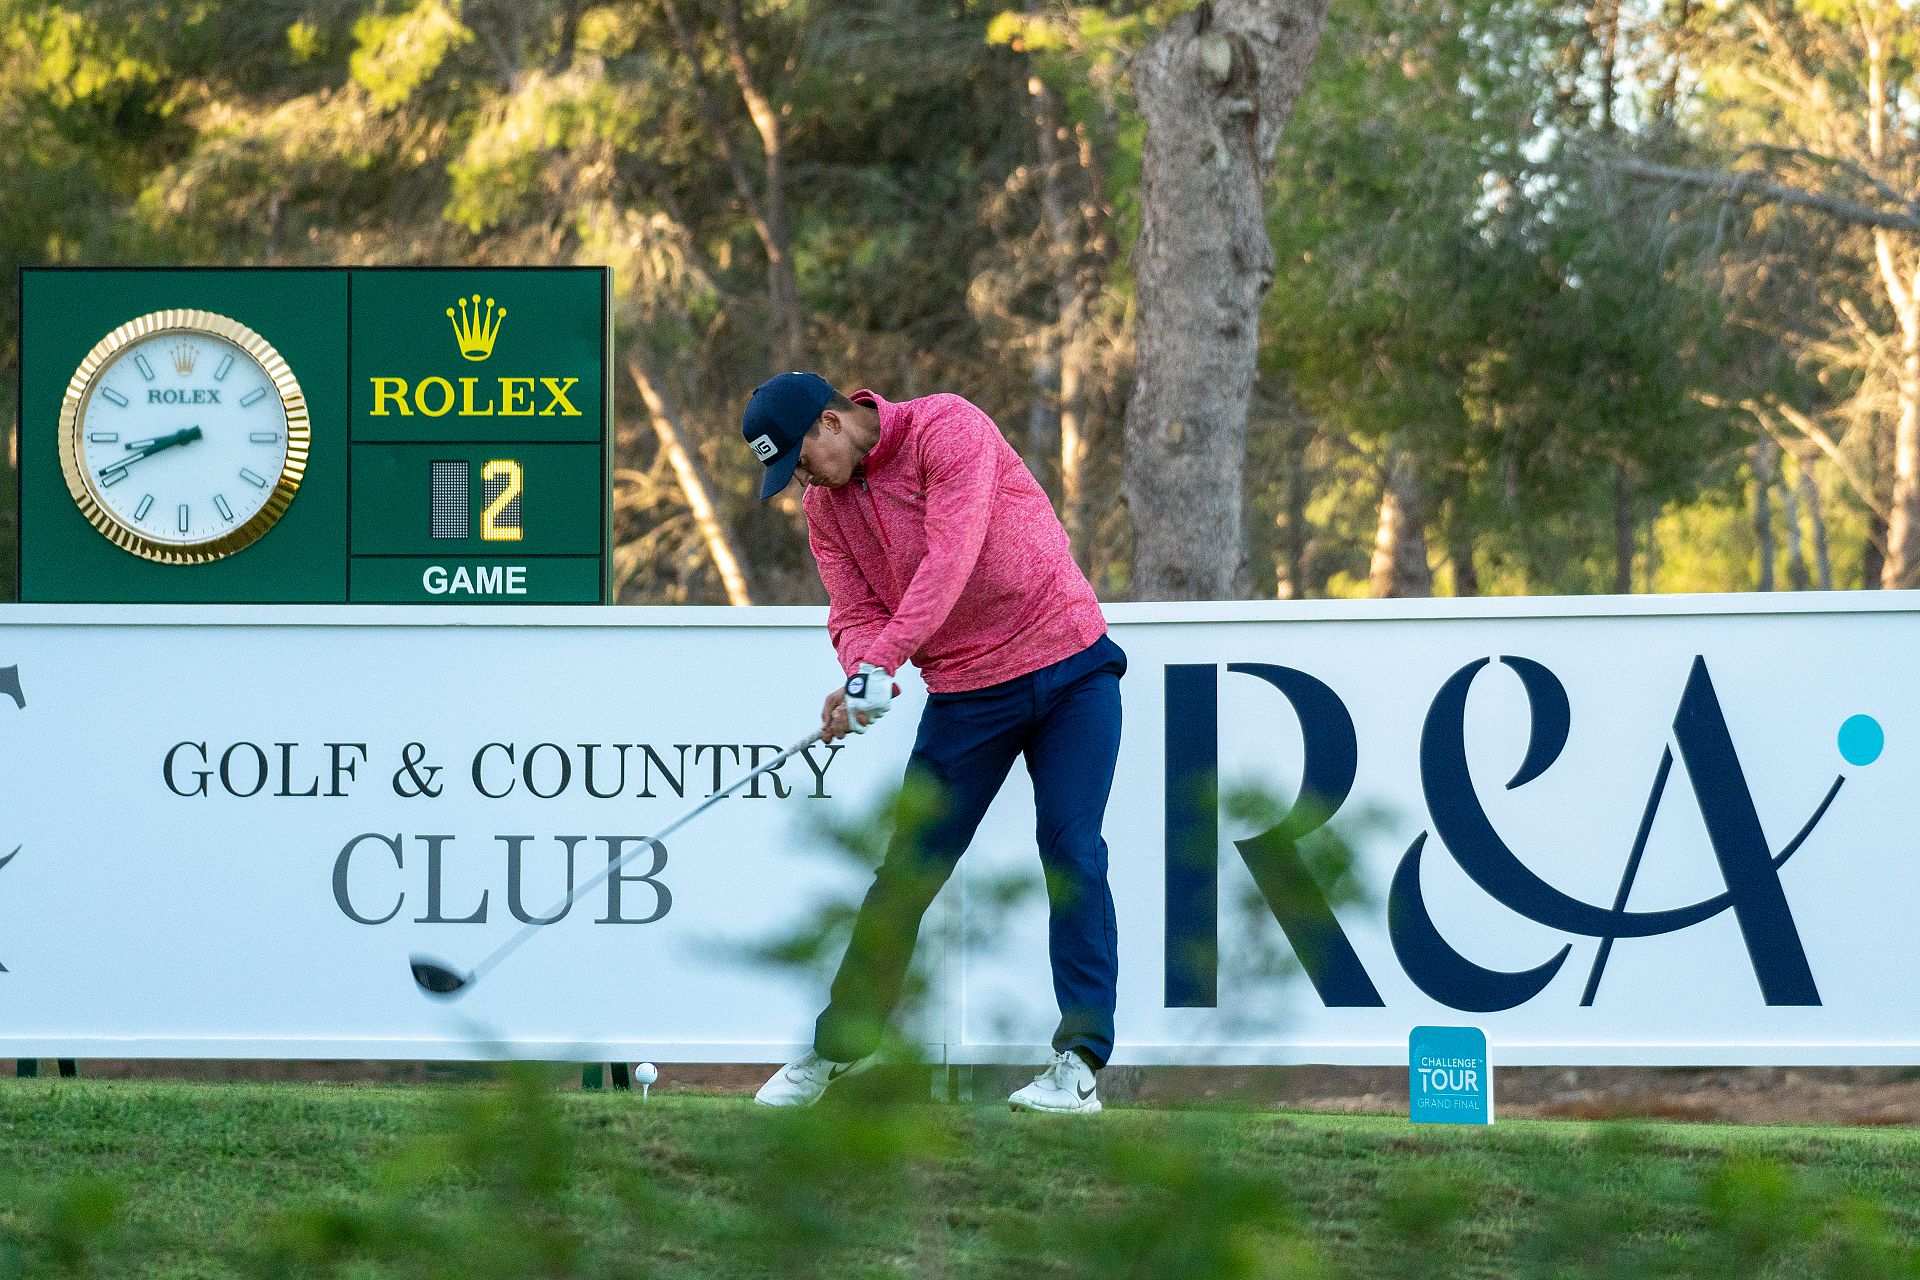 FBGolf.com - Rolex Challenge Tour Grand Final supported by The R&A